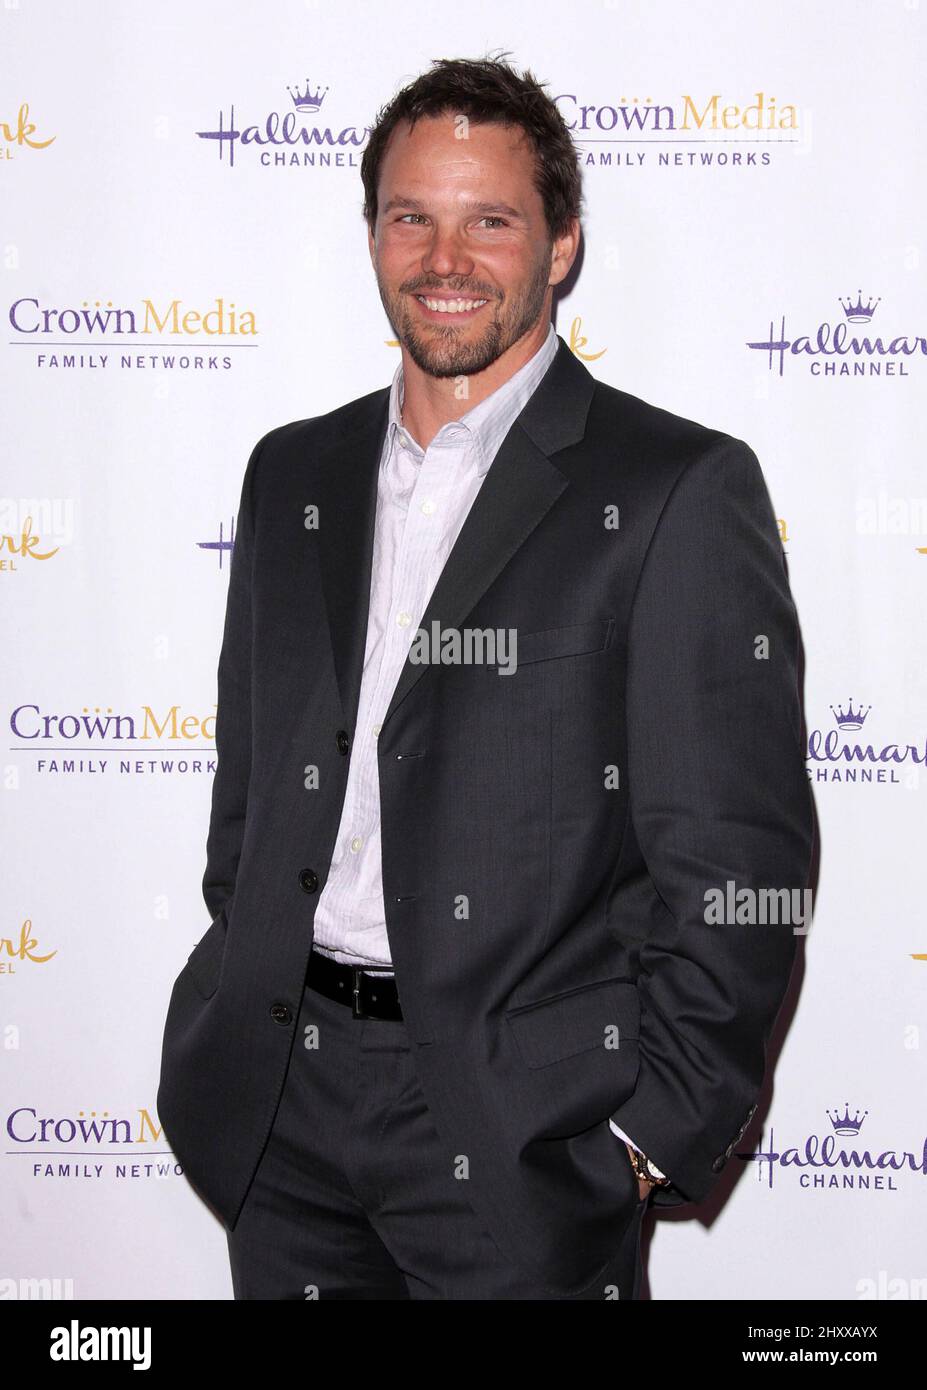 Dylan Bruno during the Hallmark Evening Gala during the 2012 TCA Winter Press Tour held at the Tournament House, California Stock Photo